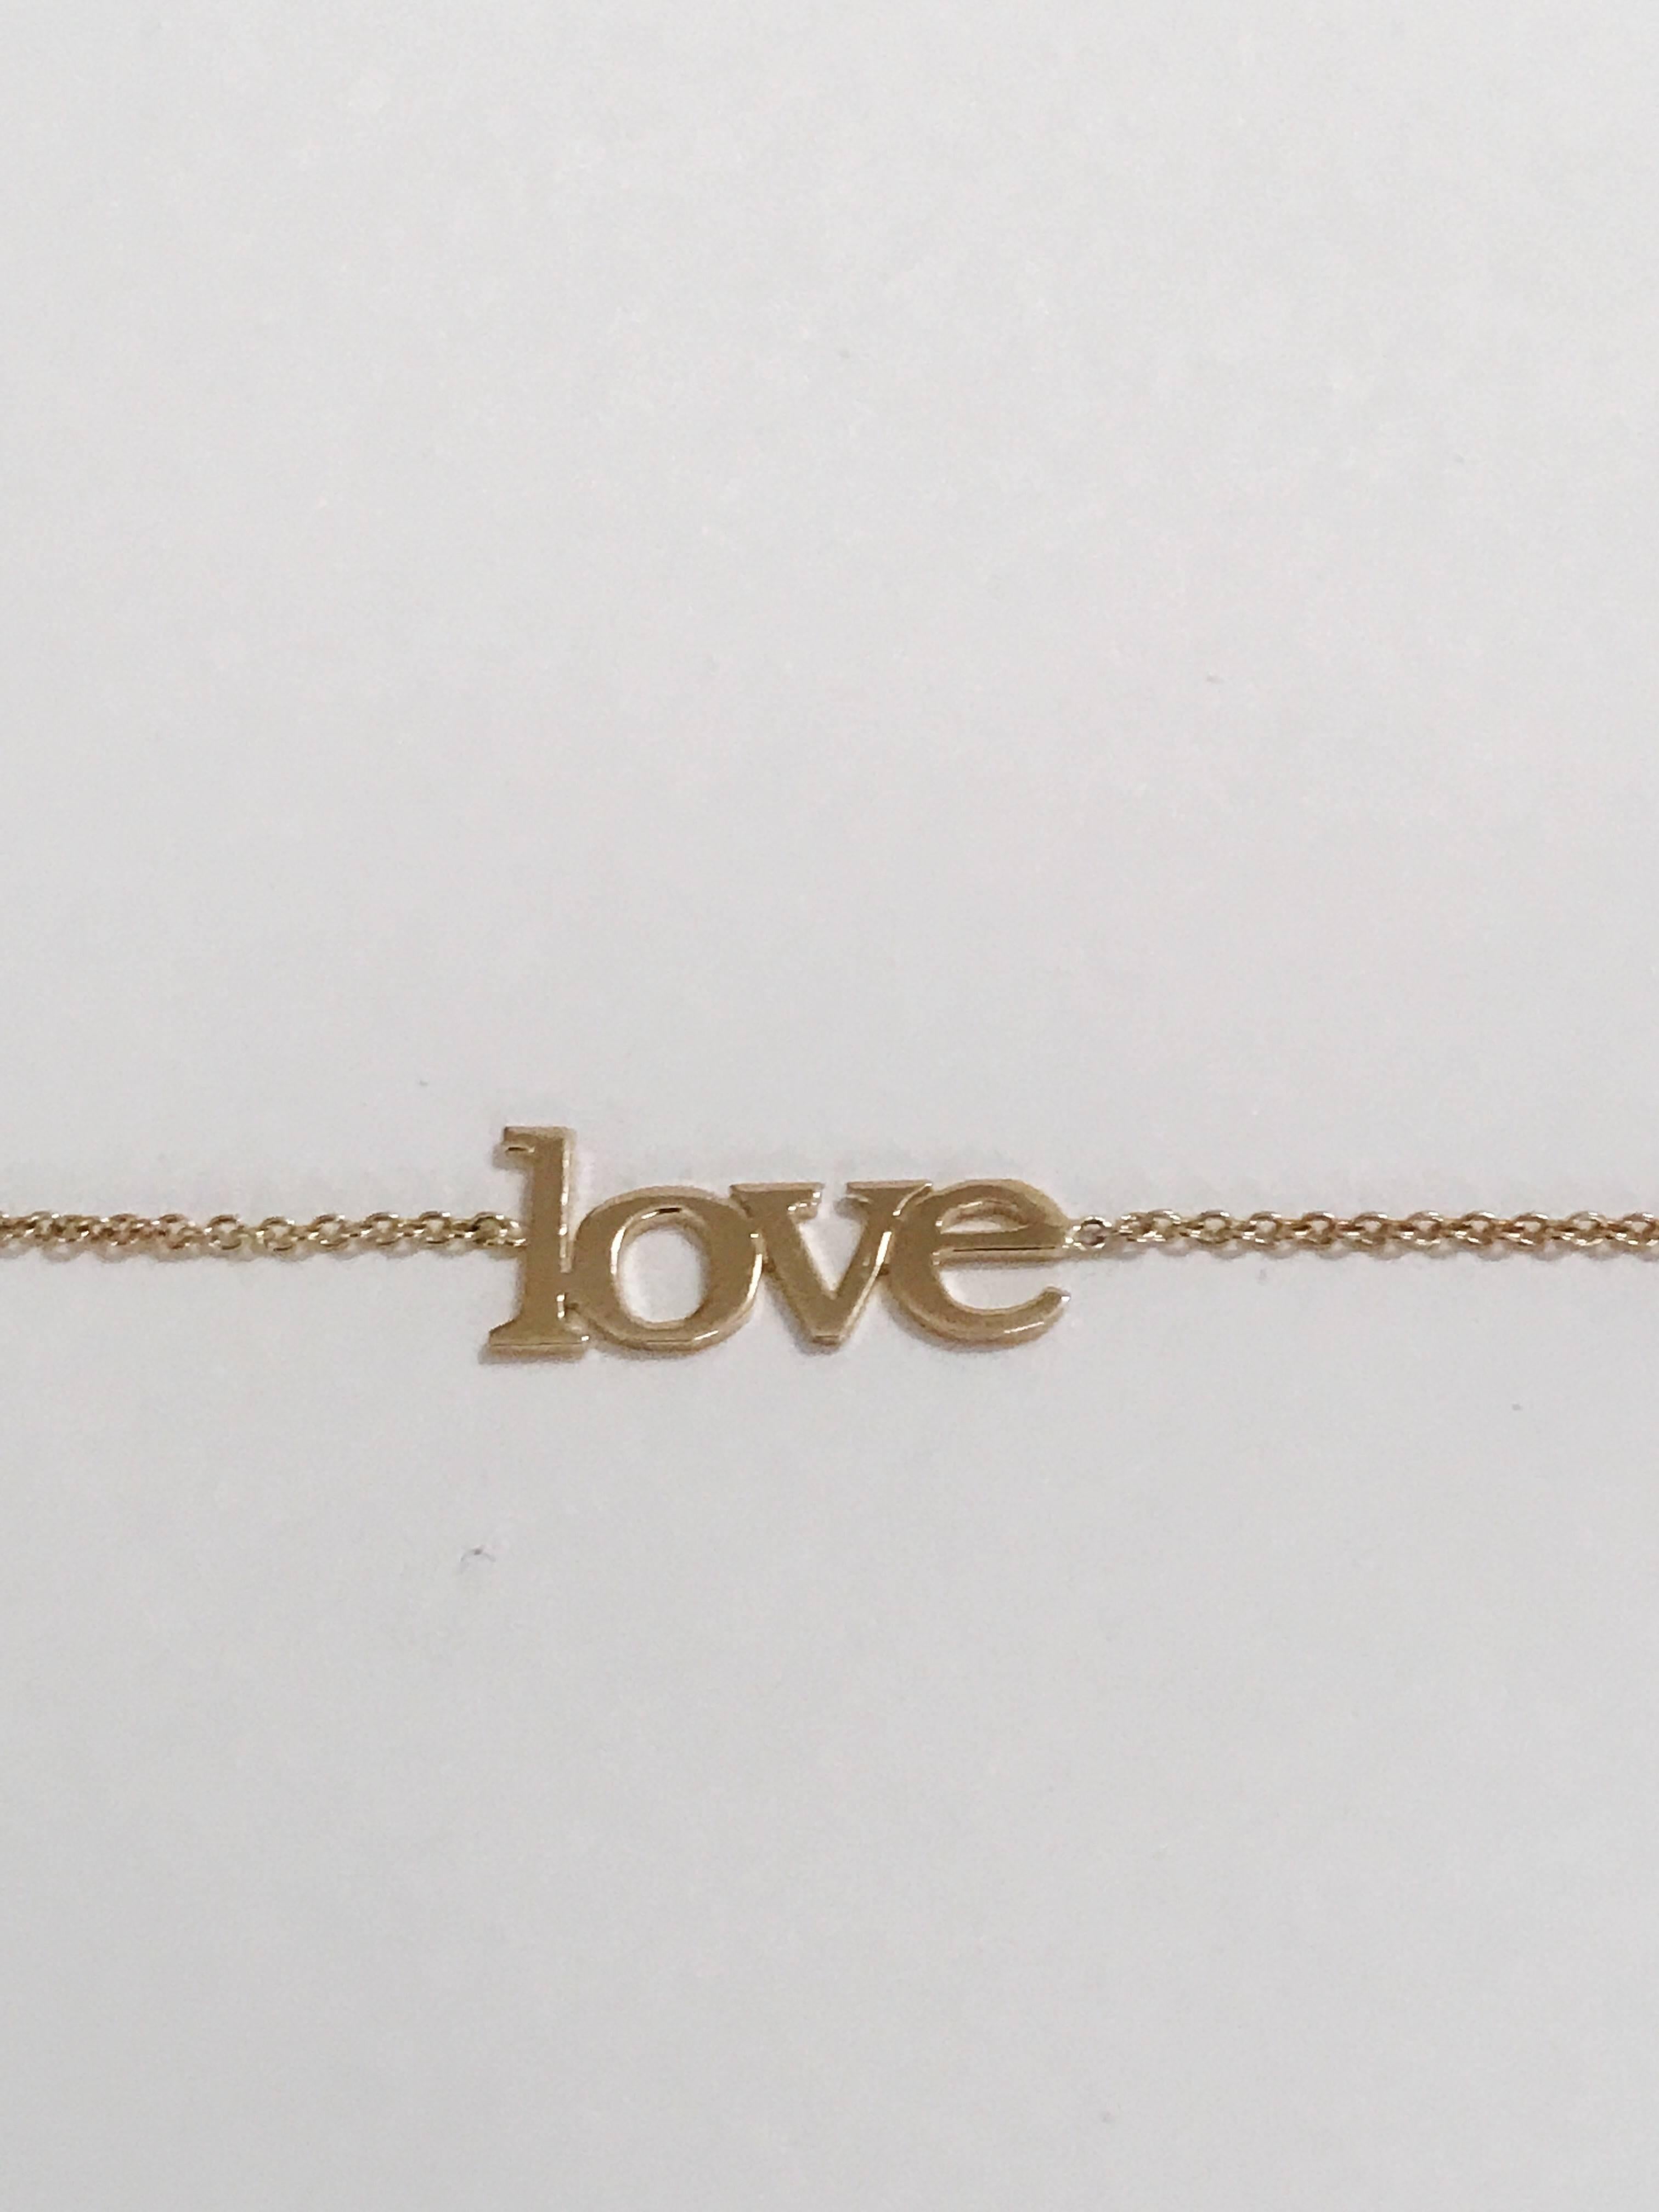 14kt Yellow Gold Large Love Bracelet measures 7.5 inches long. 

The 